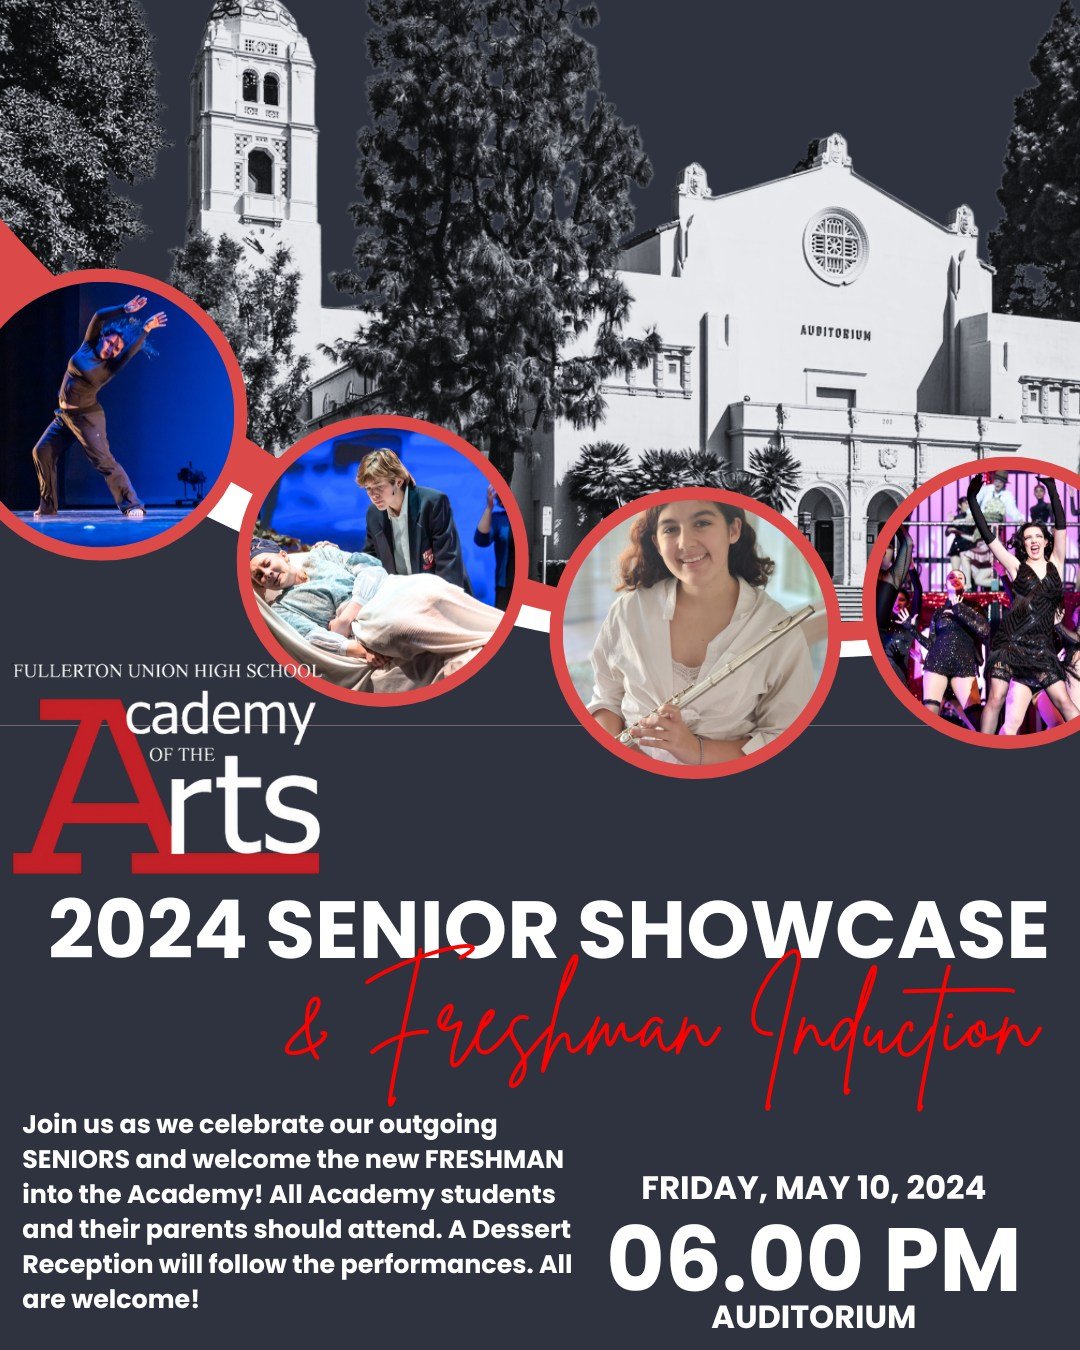 Academy of the Arts Senior Showcase and New Member Induction!

Join us as we celebrate our outgoing SENIORS and welcome the new FRESHMAN into the Academy! All Academy students and their parents should attend. A Dessert Reception will follow the perfo